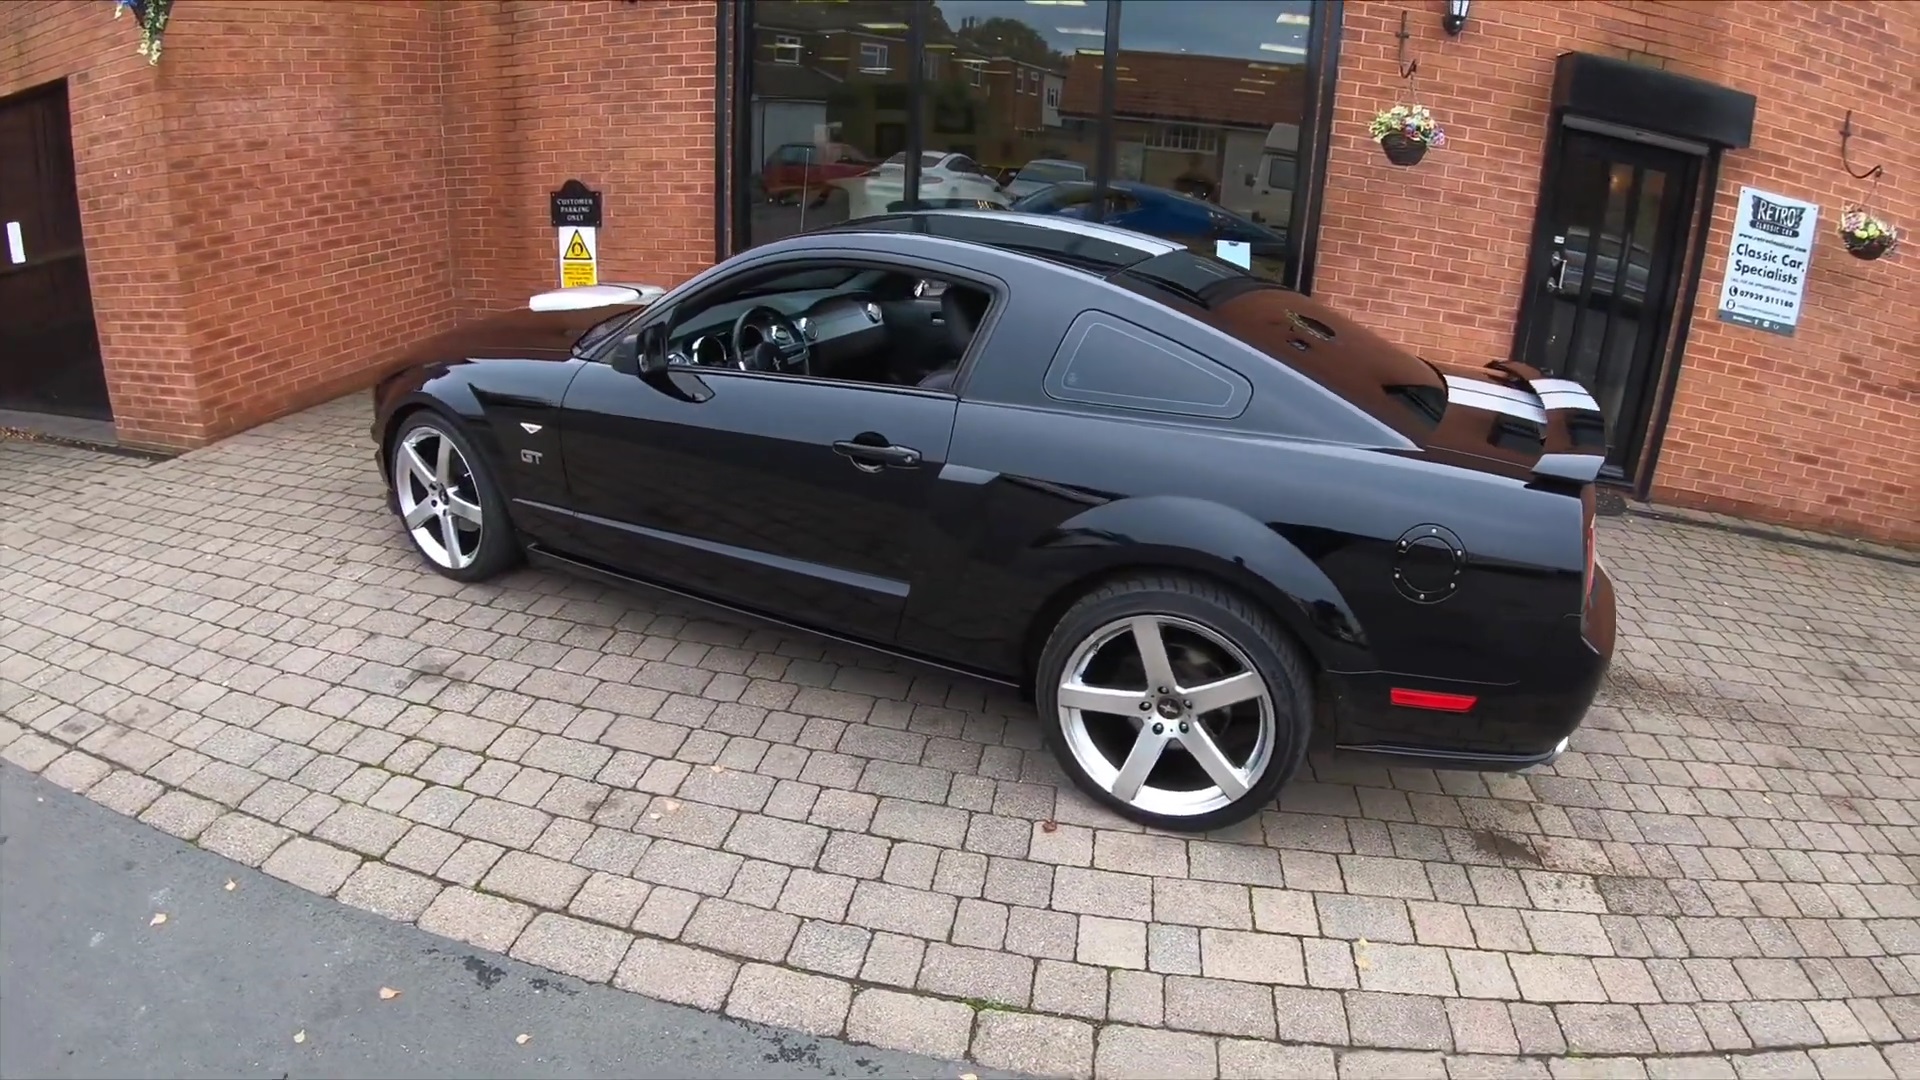 Video: 2007 Ford Mustang 4.6 V8 GT POV Test Drive